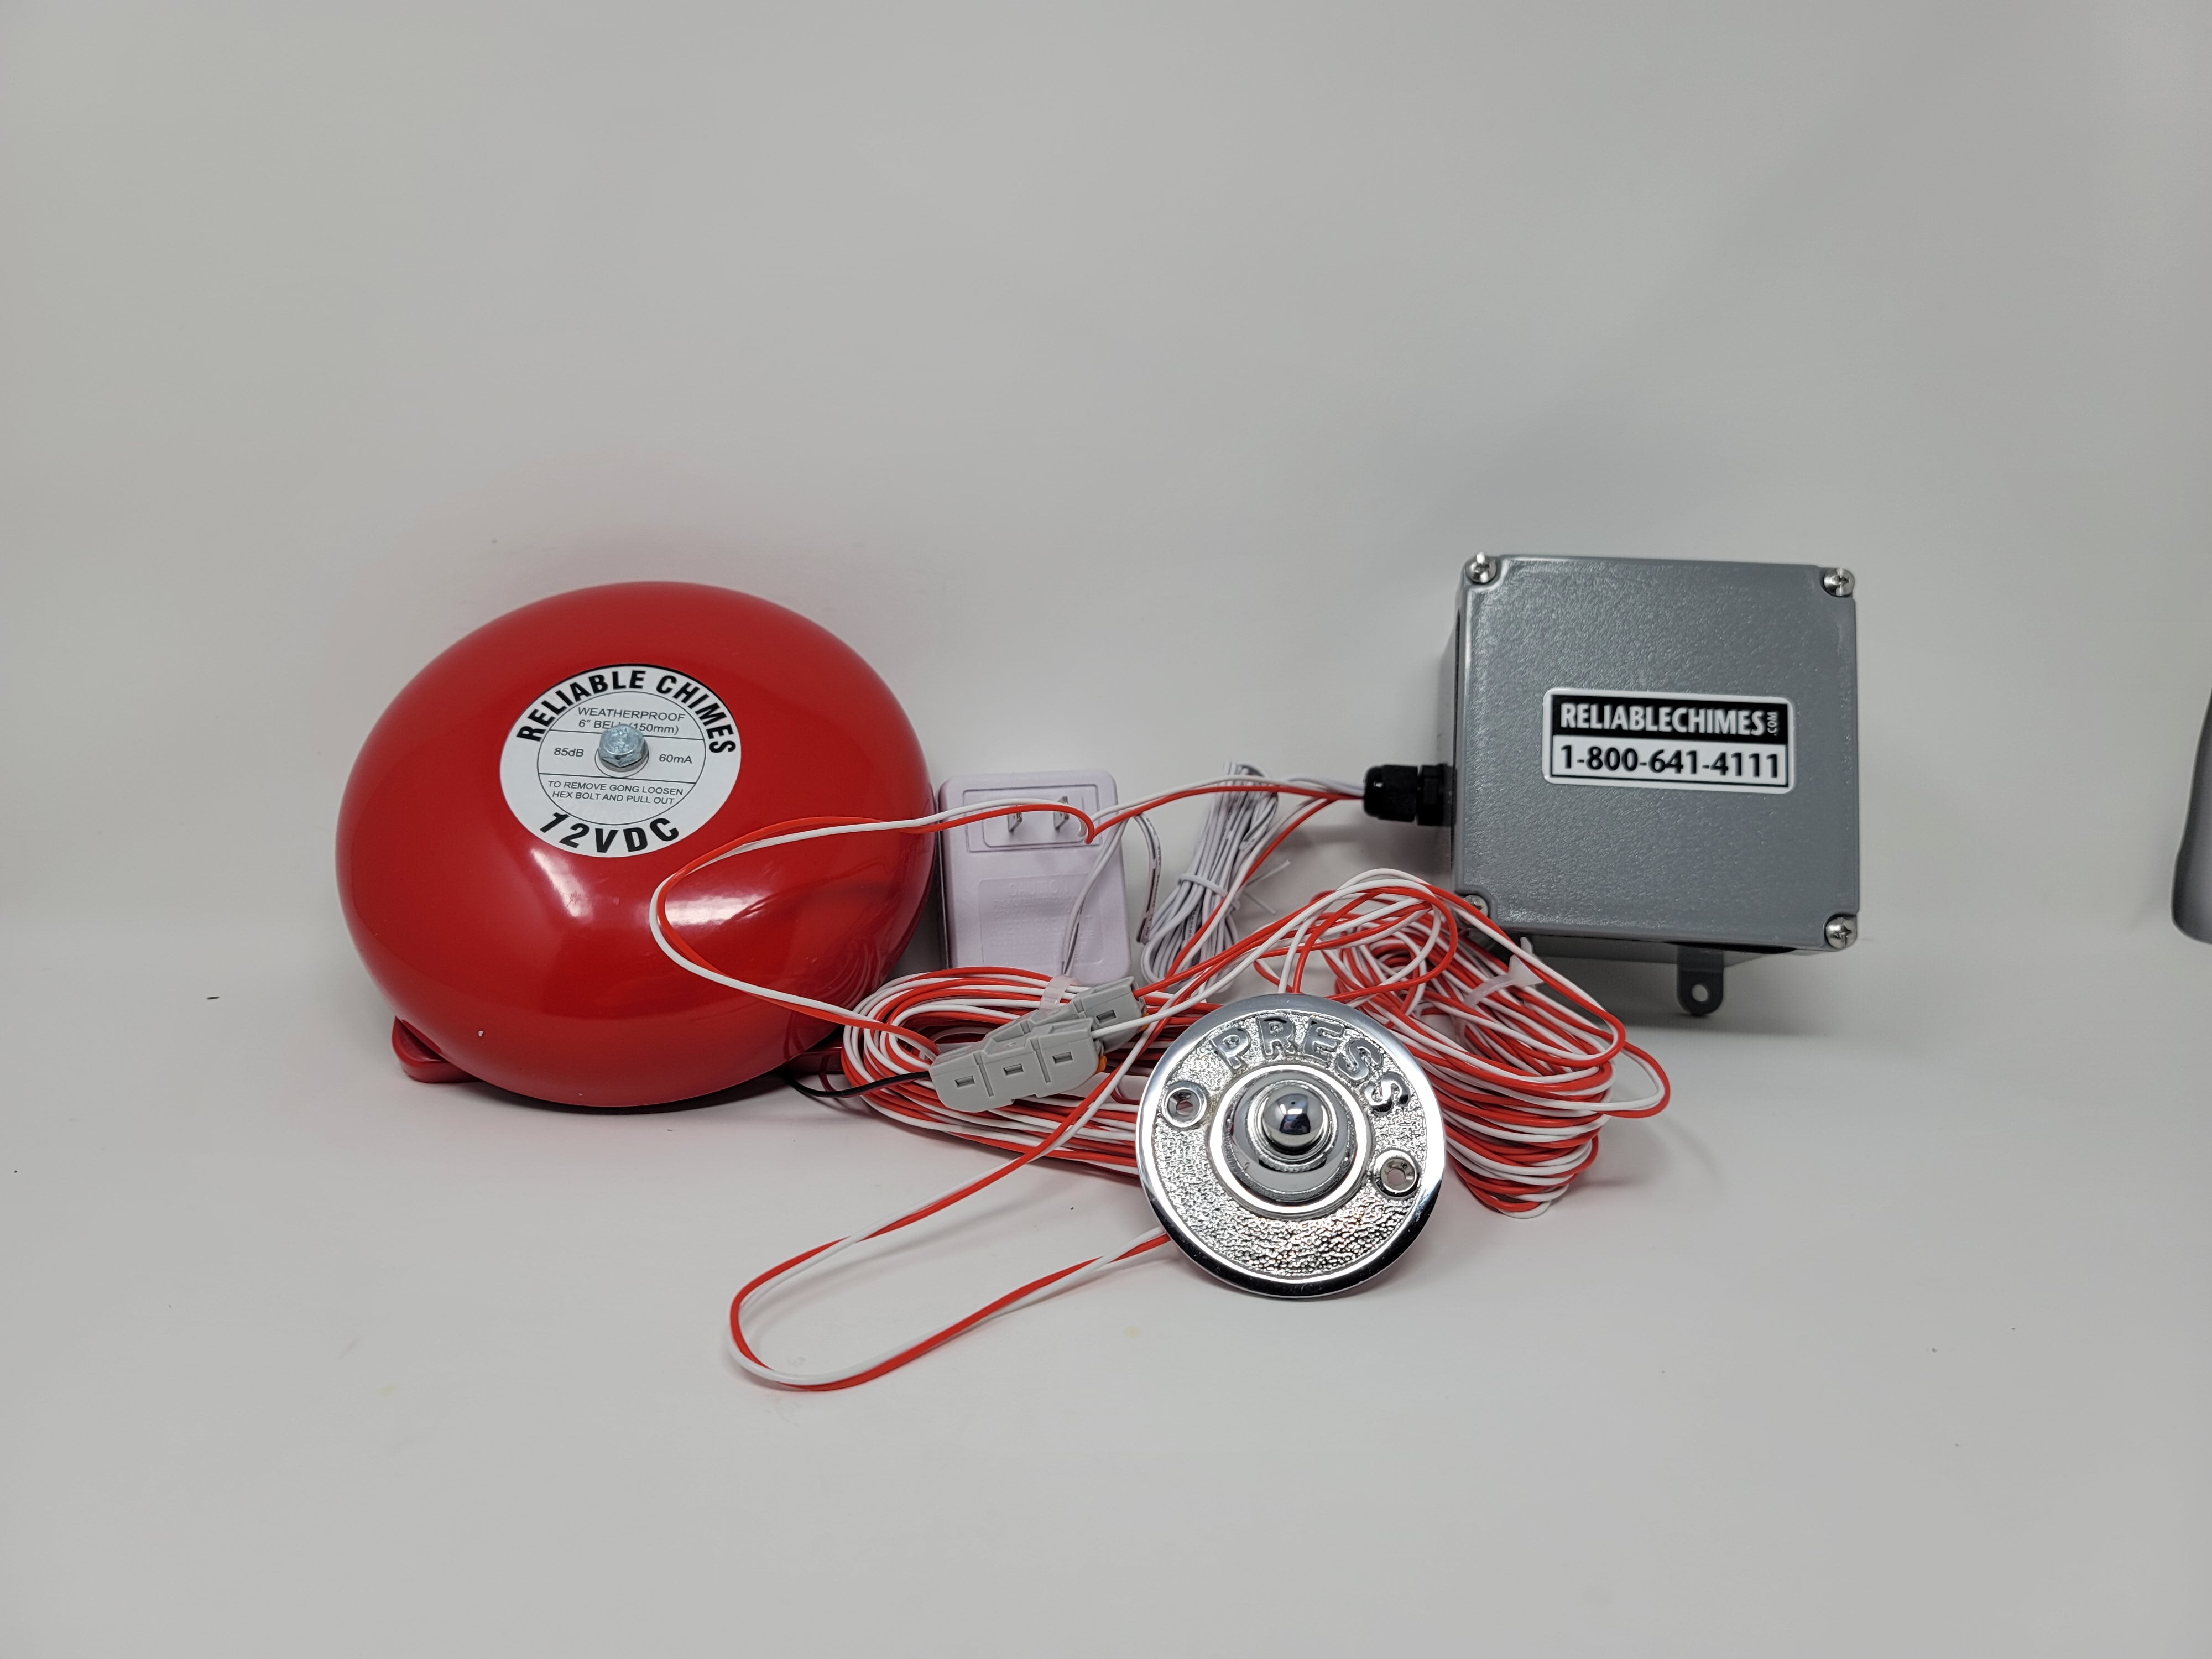 Wired Warehouse Door Bell with Firebell - Reliable Chimes